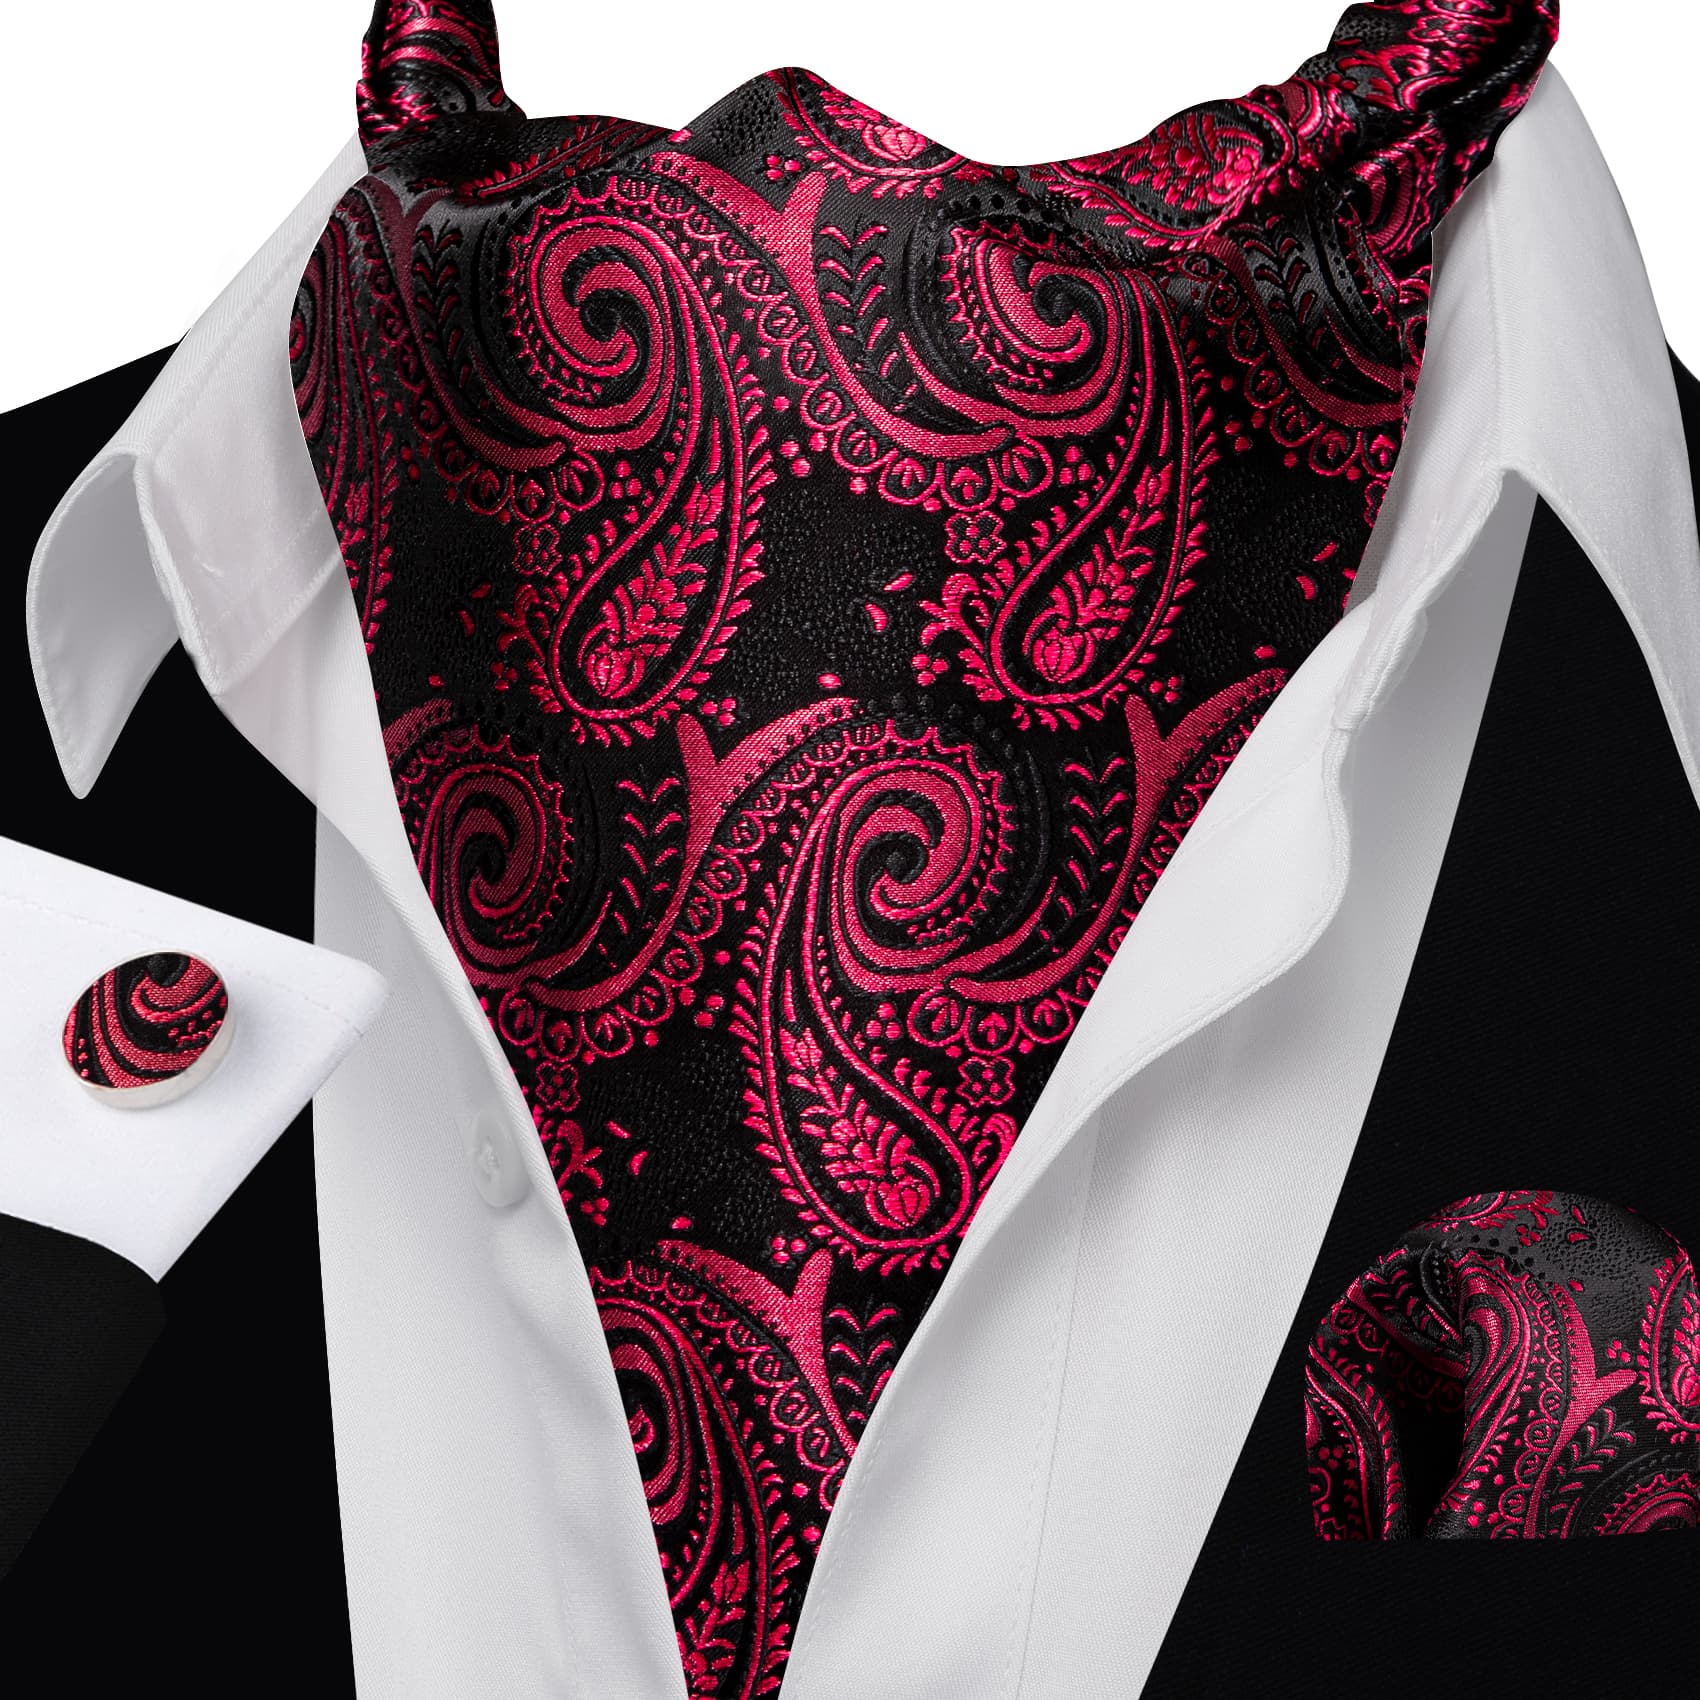 mens ascot scarf hanky cufflinks set and whit shirt  black suit for men s business outfit 